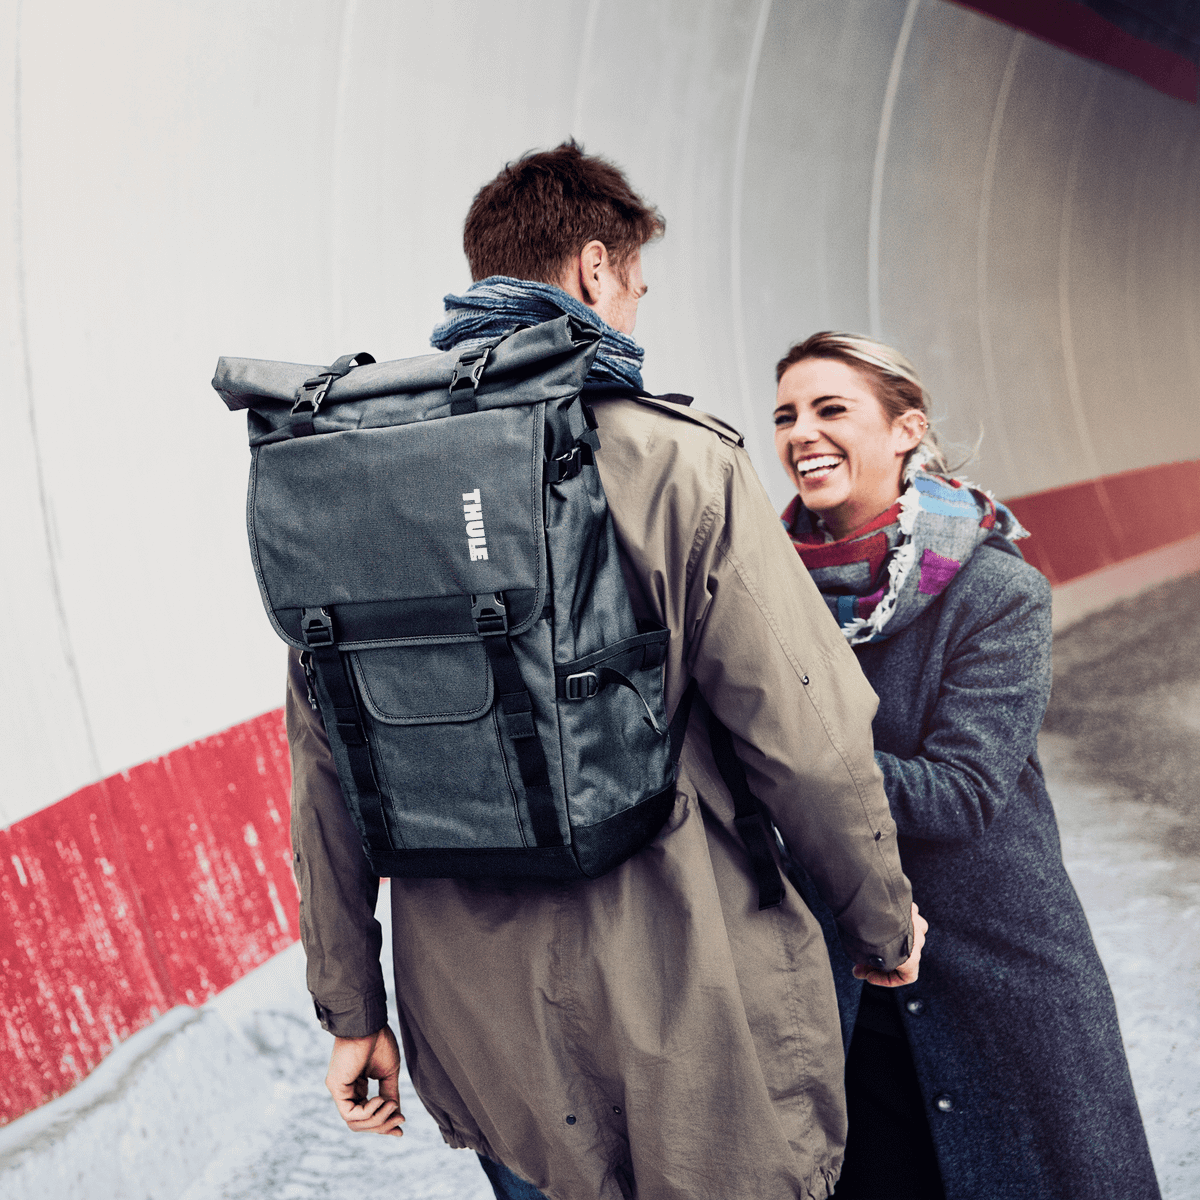 A man speaks to a woman next to a concreate wall carrying a Thule Covert DSLR Rolltop backpack.